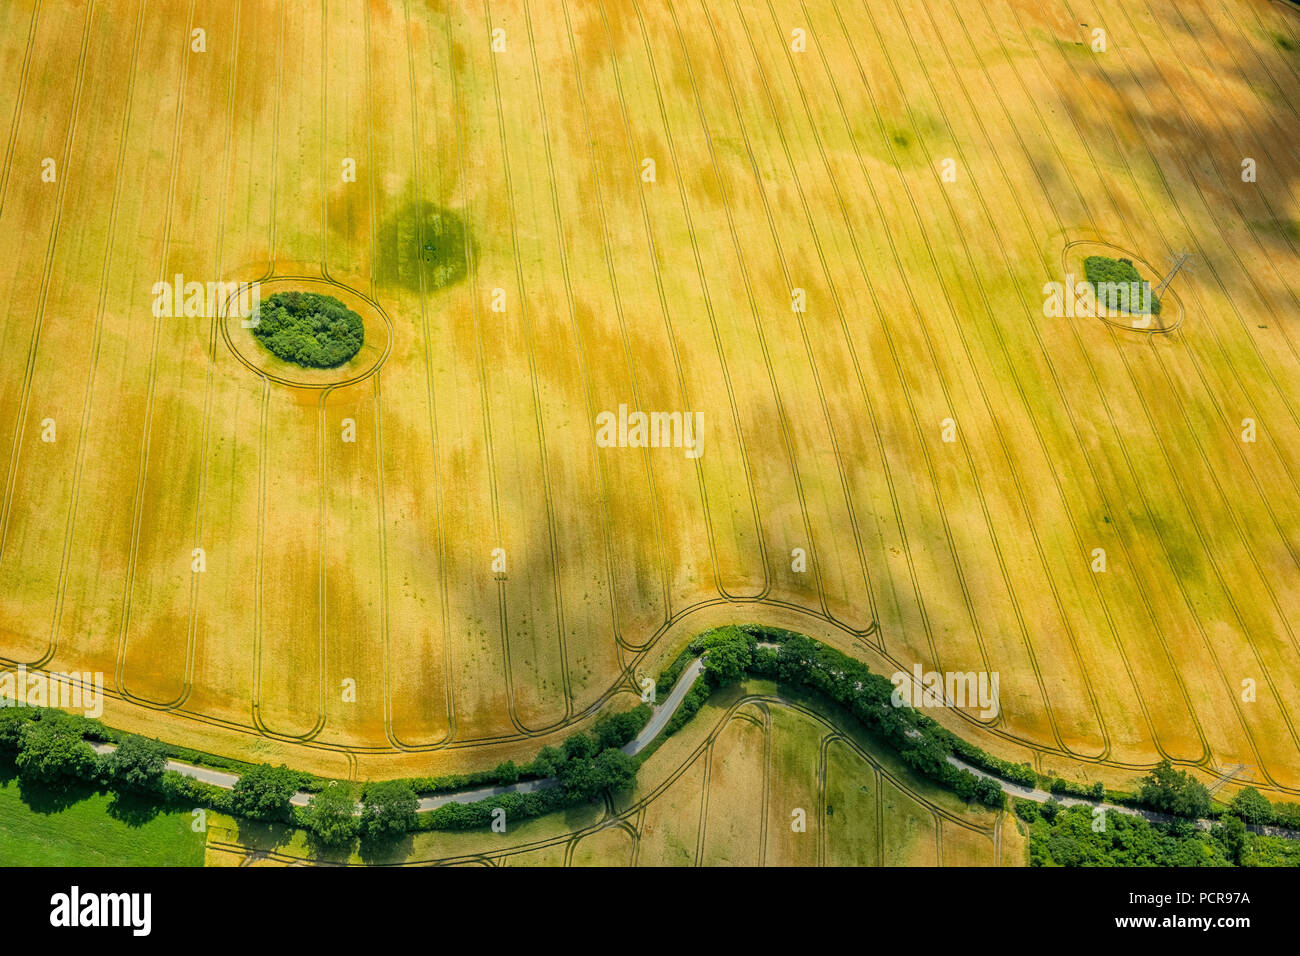 Cornfield with bush hedges in the shape of a face, agriculture, Bad Oldesloe, Schleswig-Holstein, Germany Stock Photo